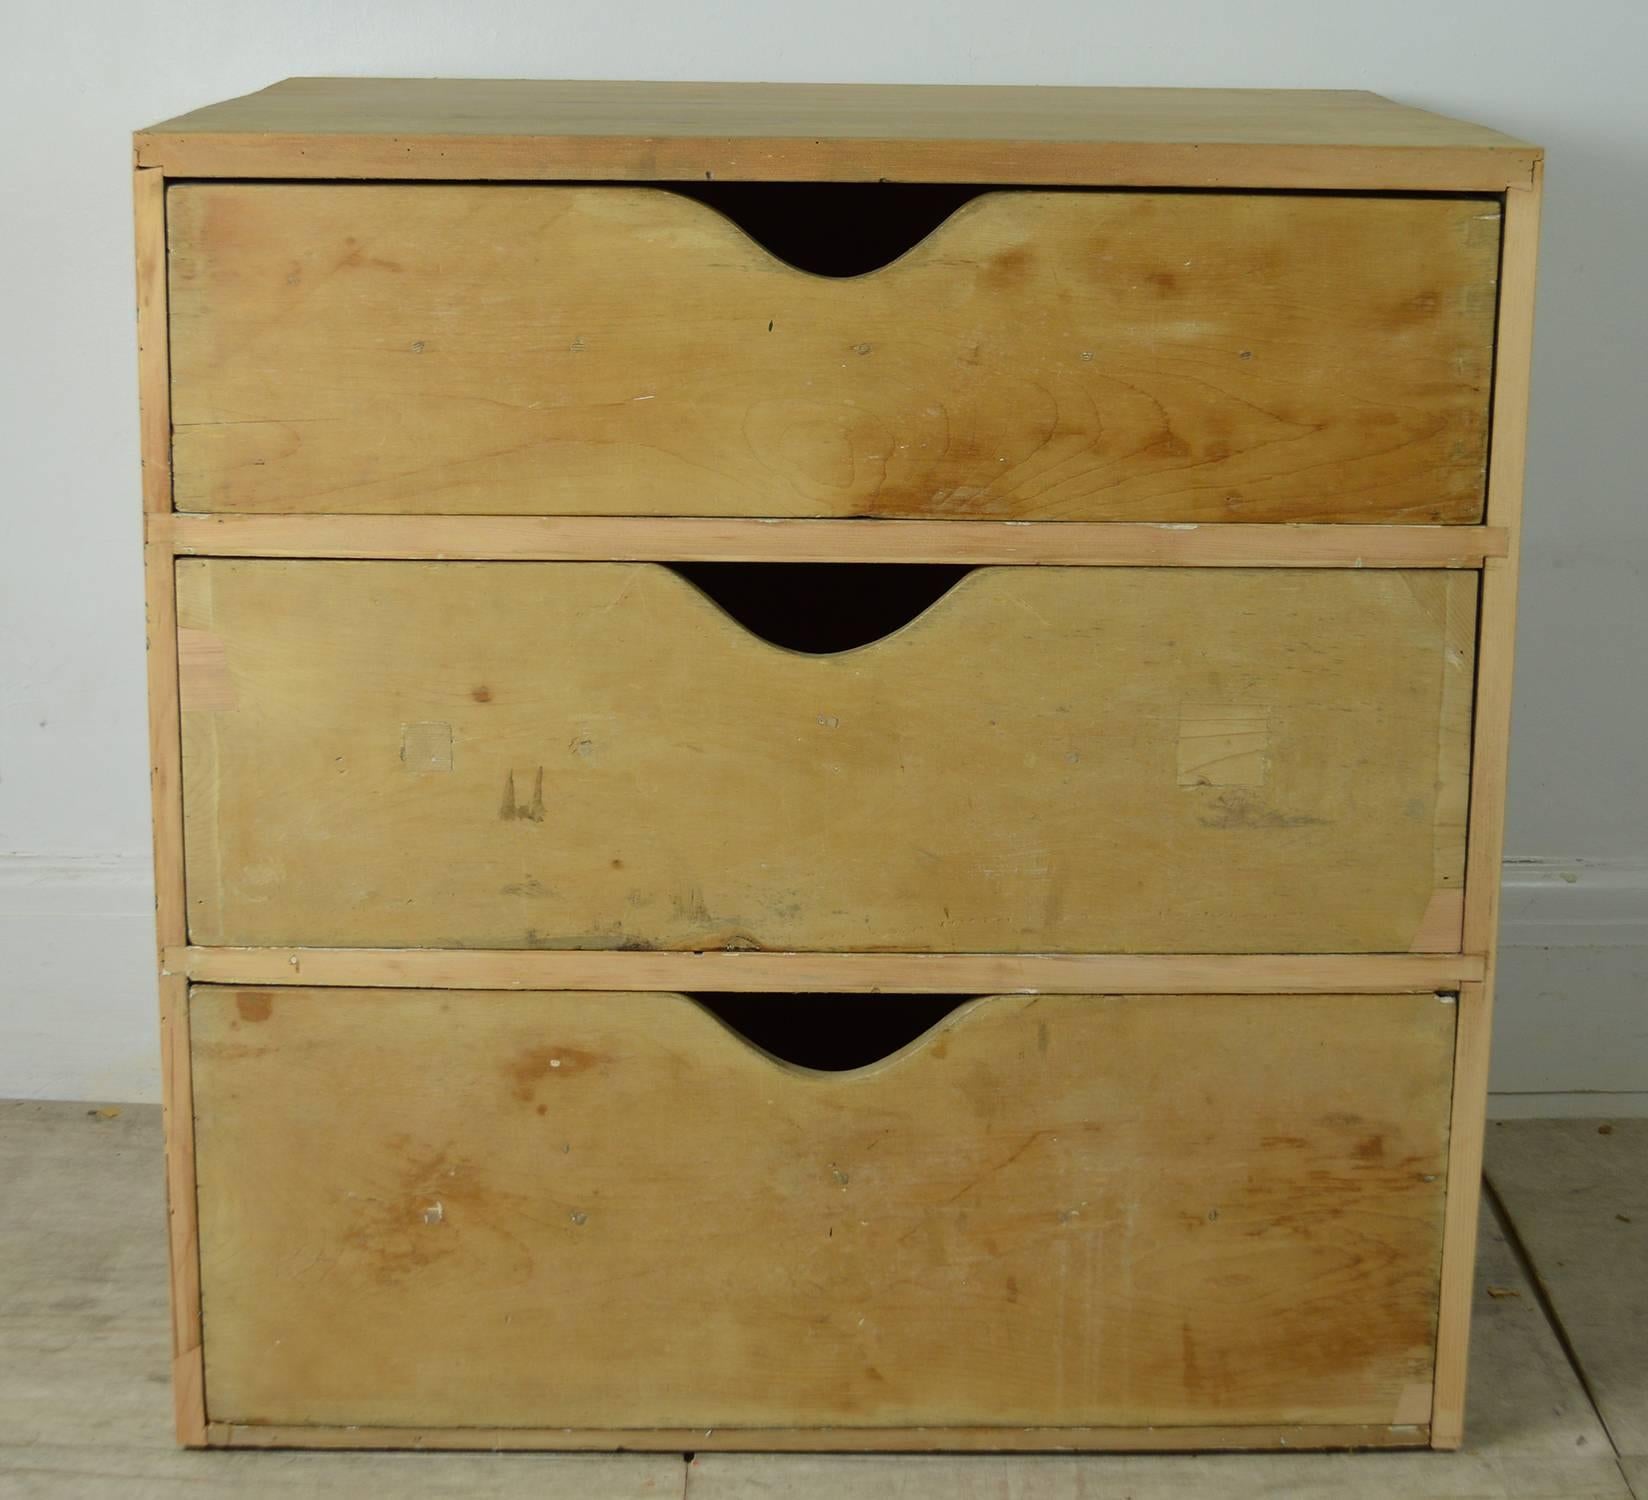 
A very elegant pine chest of drawers. The ultimate in simple lines and understated.

Lovely color. Clean interior.

There are a few areas of old restoration / patches most notably on the middle drawer.

It works quite nicely with a plan chest I